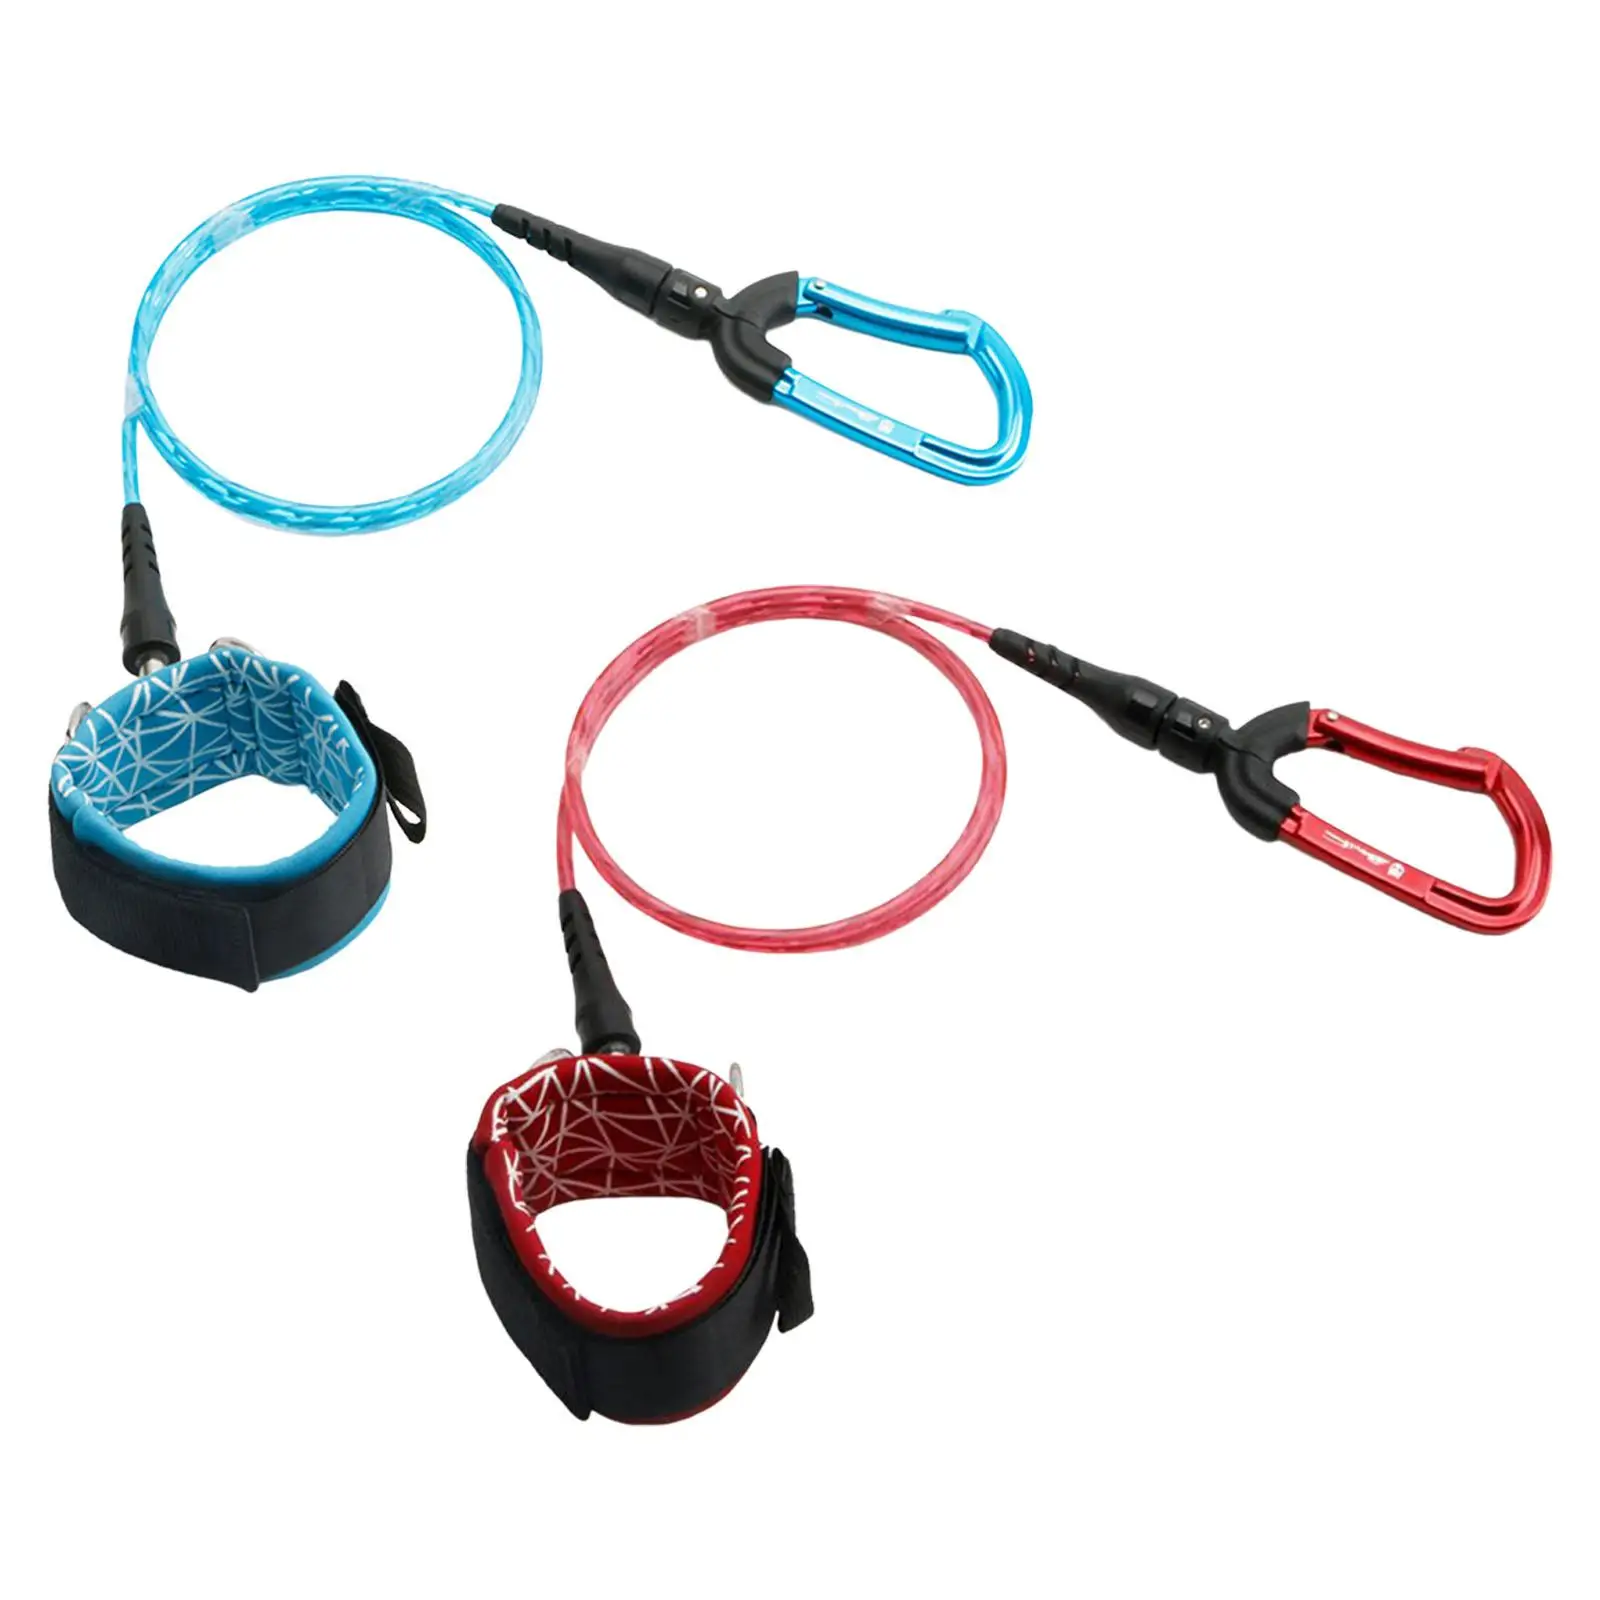 Freediving Lanyard Scuba Diving Rope Professional Dive Wristband Safety Rope Stainless Steel Lanyard Underwater Sports